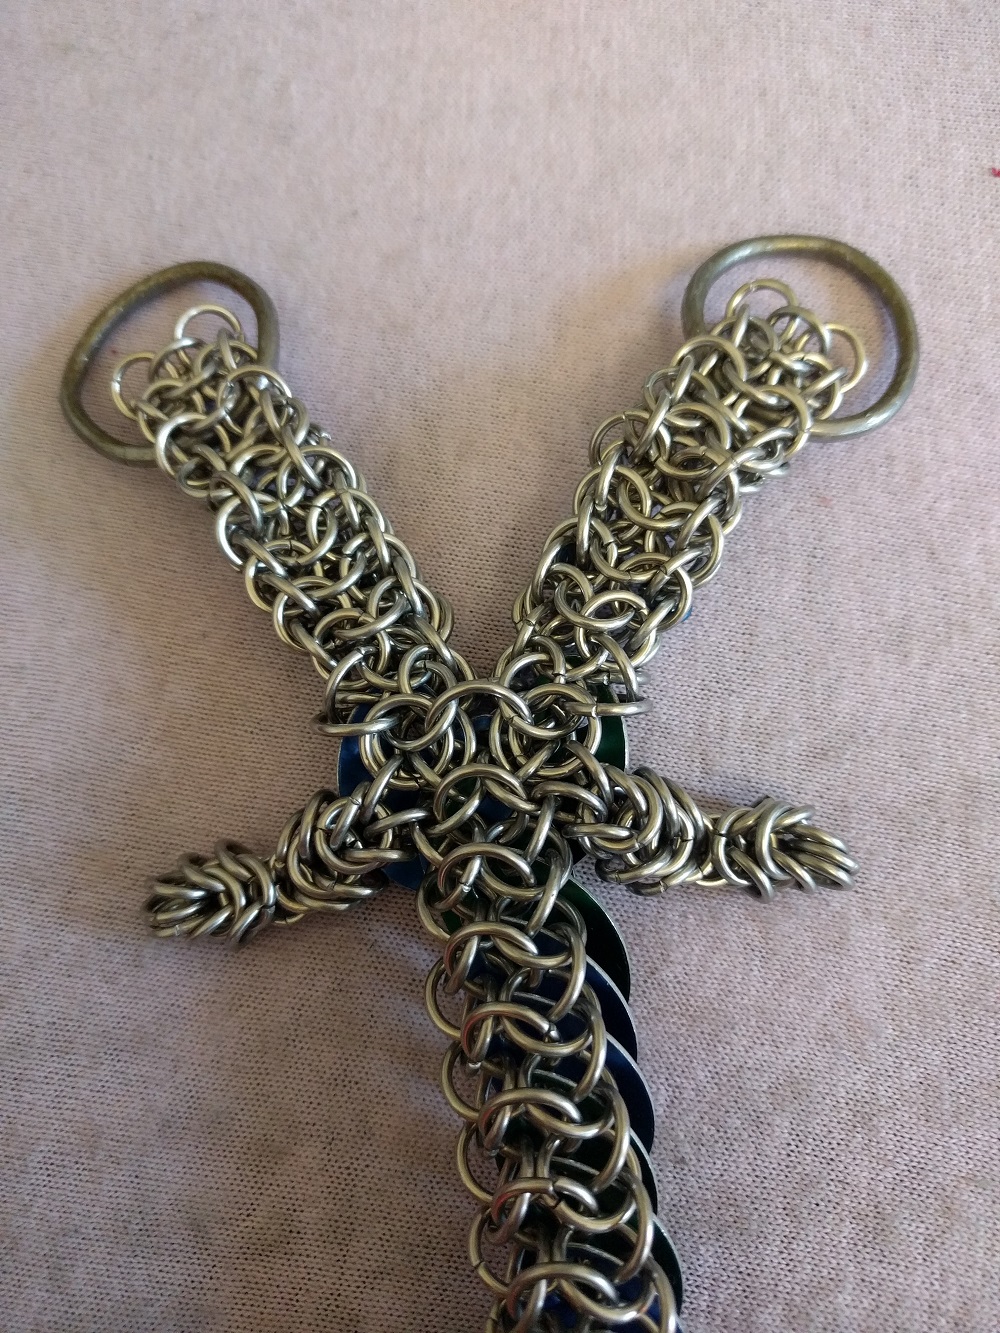 The underside of the neck of the two headed dragon, showing the chainmaille needed there.